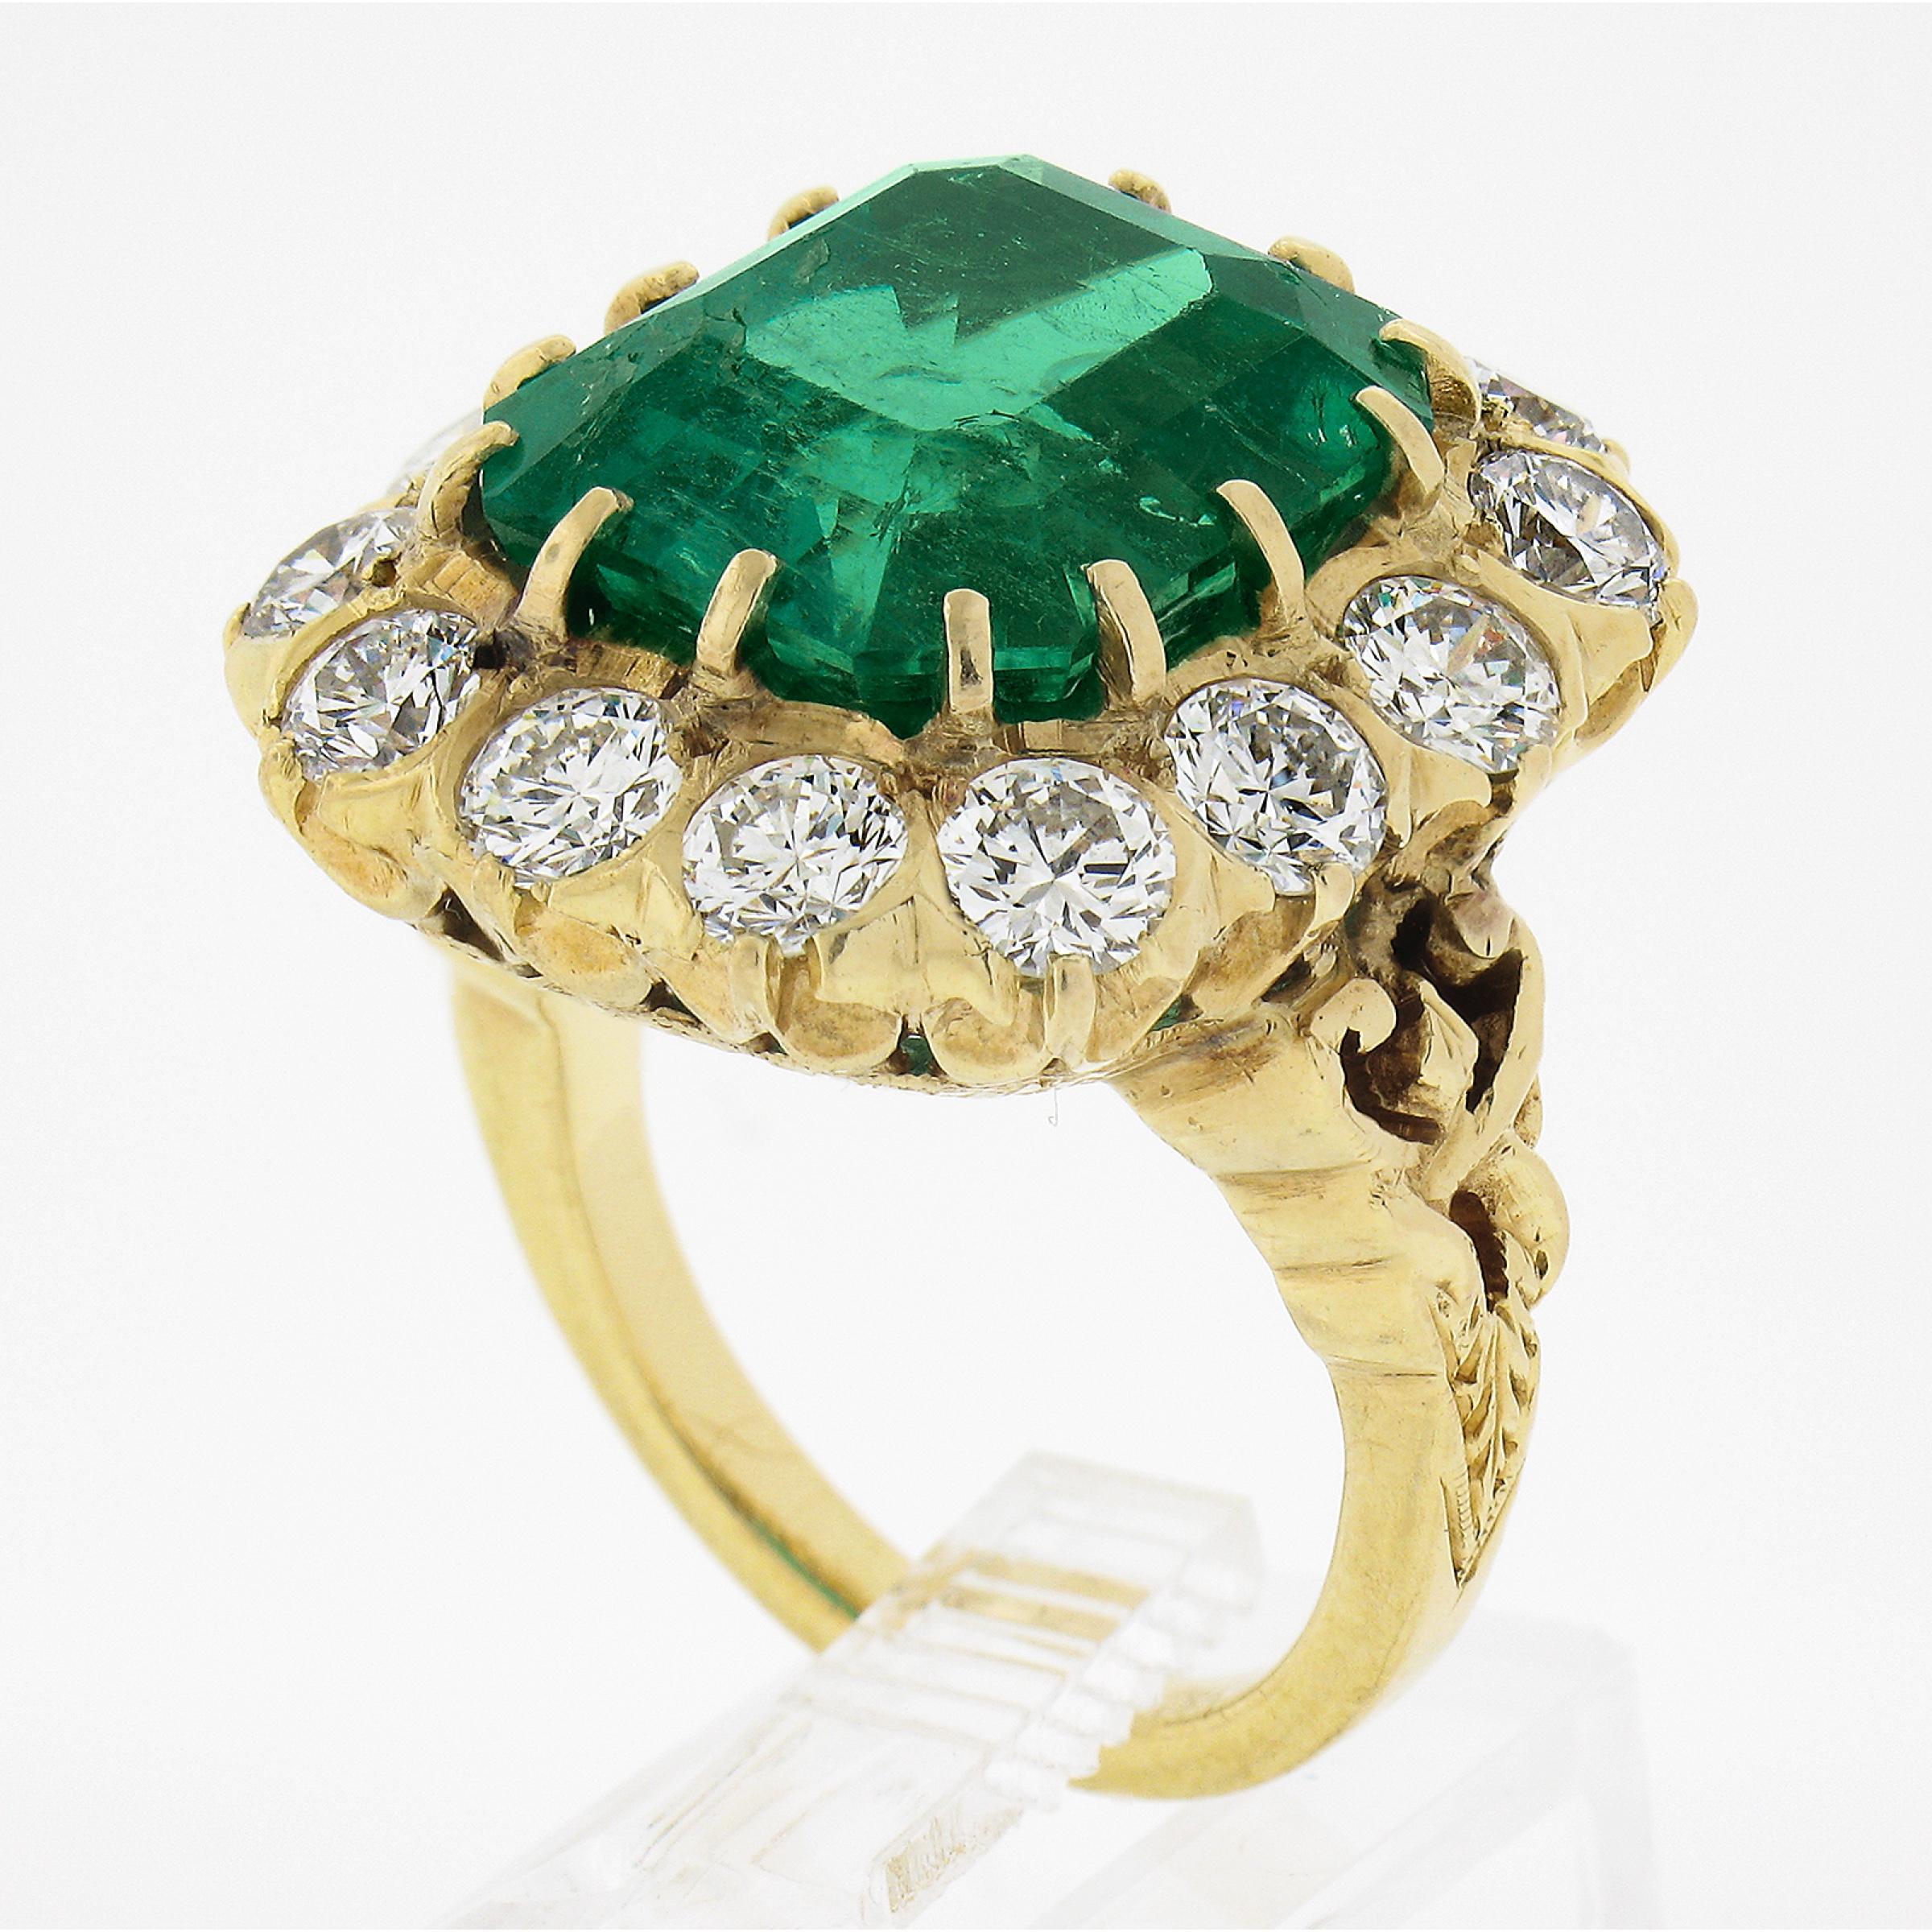 VERY FINE 18k Gold 14.3ctw AGL Colombian Emerald & Diamond Halo Cocktail Ring For Sale 4